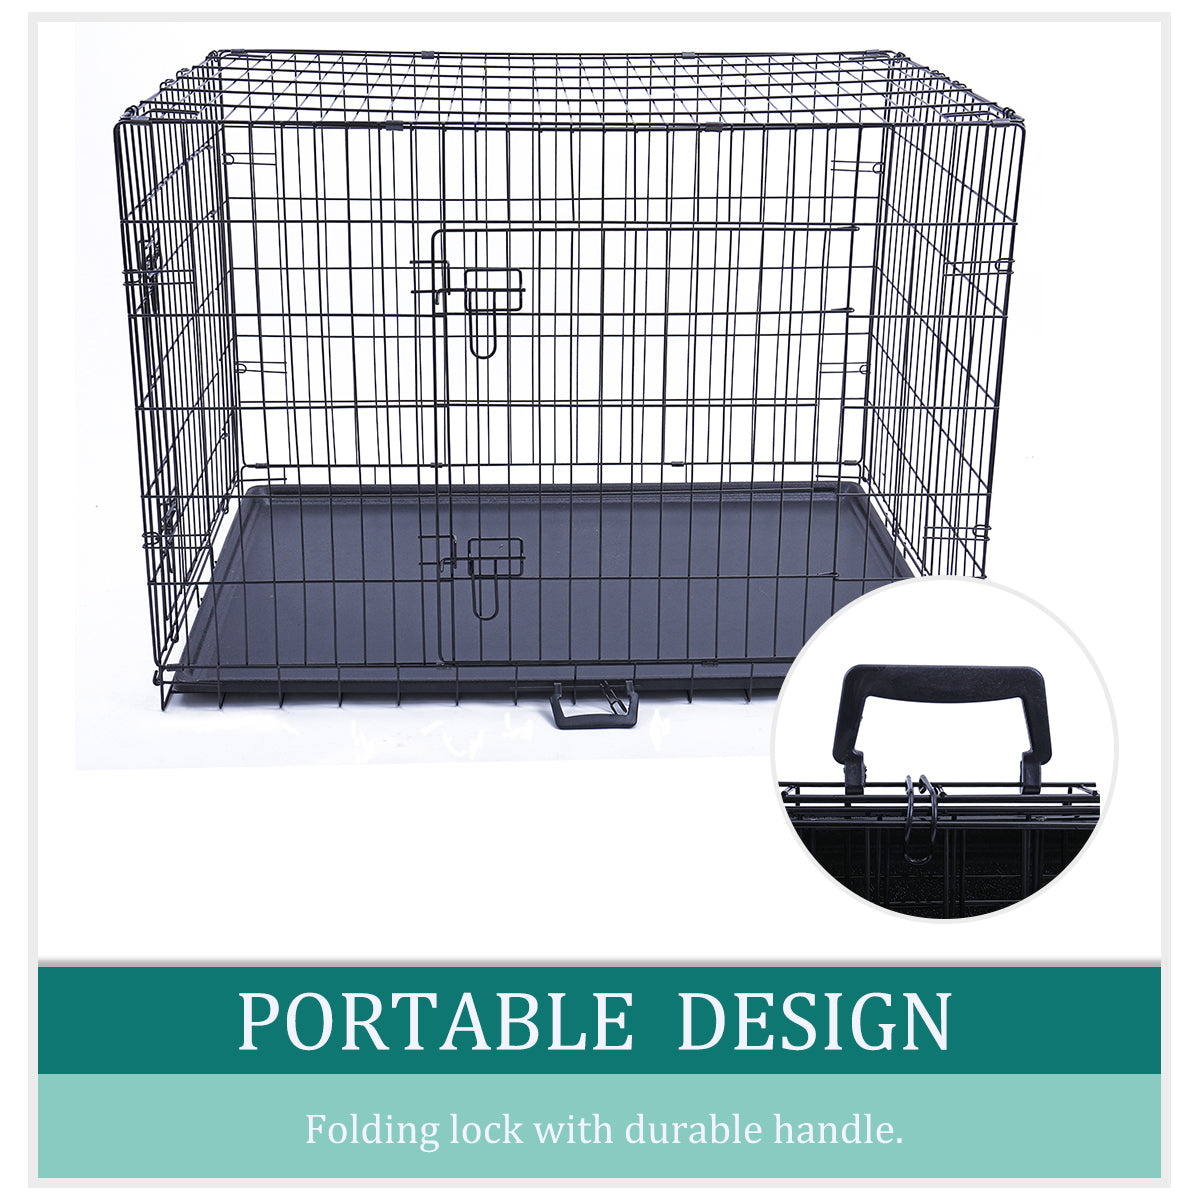 PAWZ Road Pet Dog Crate Cage Kennel